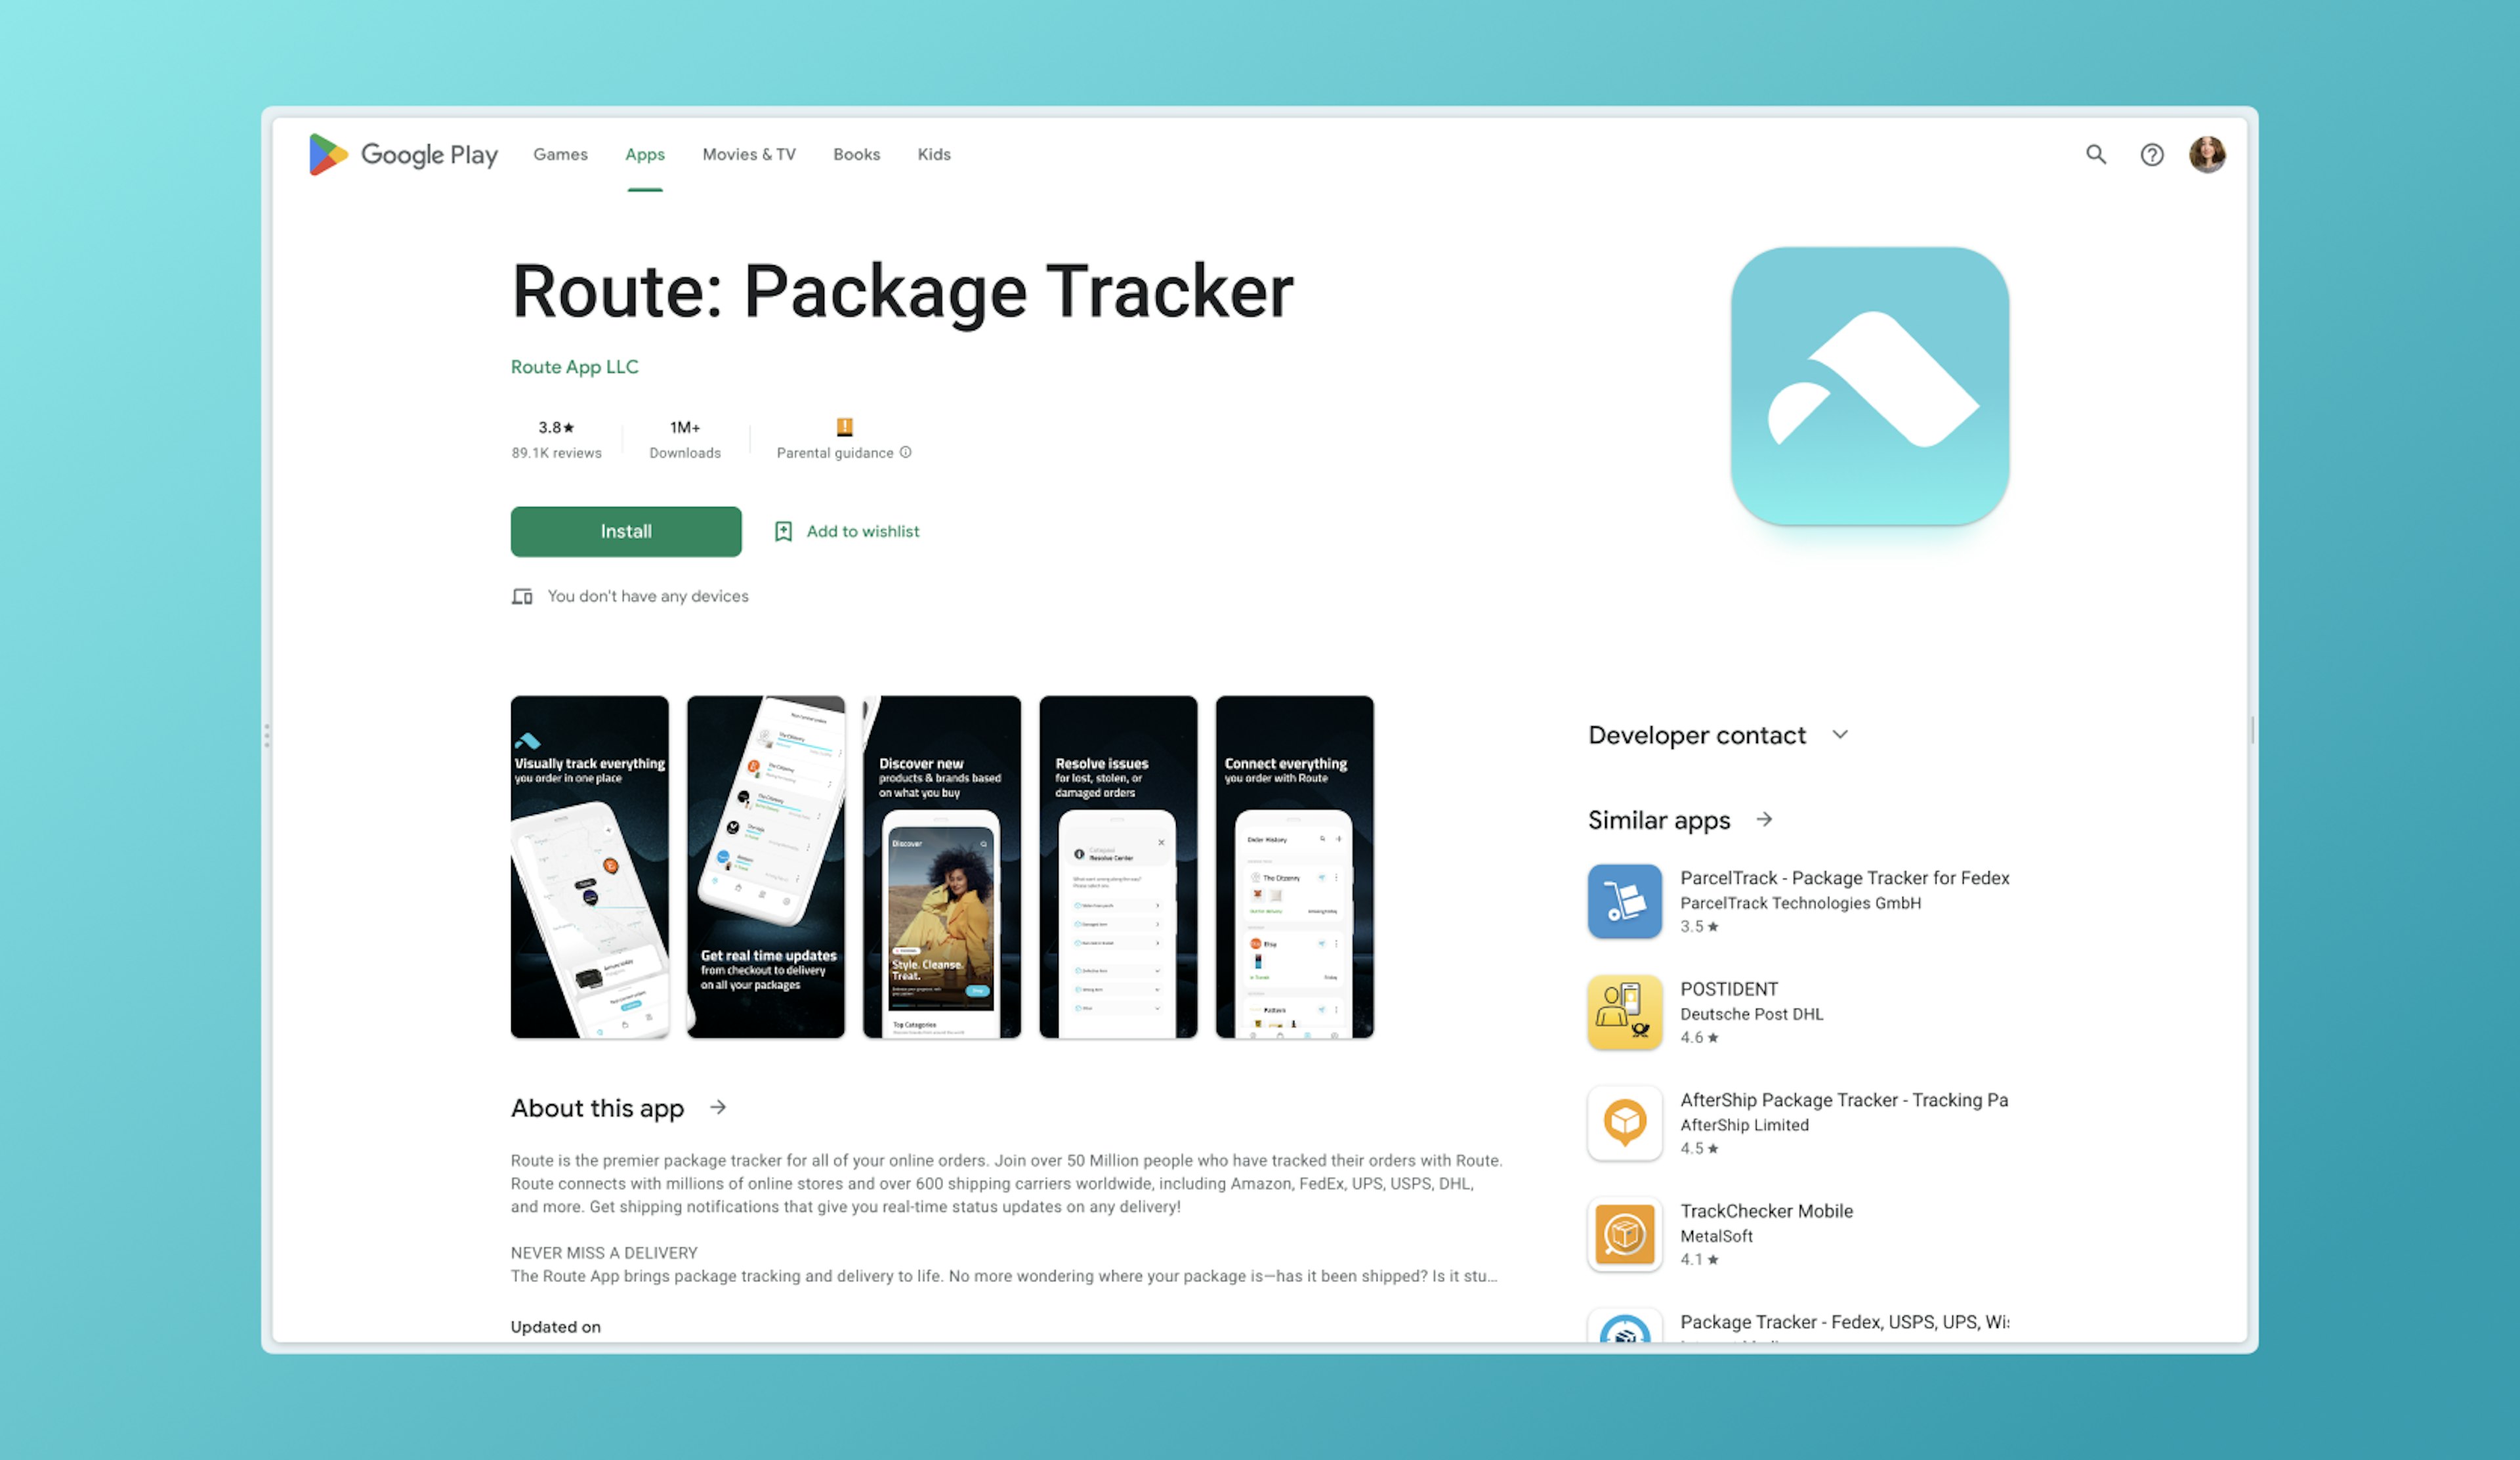 Google Playstore page for Route: Package Tracker